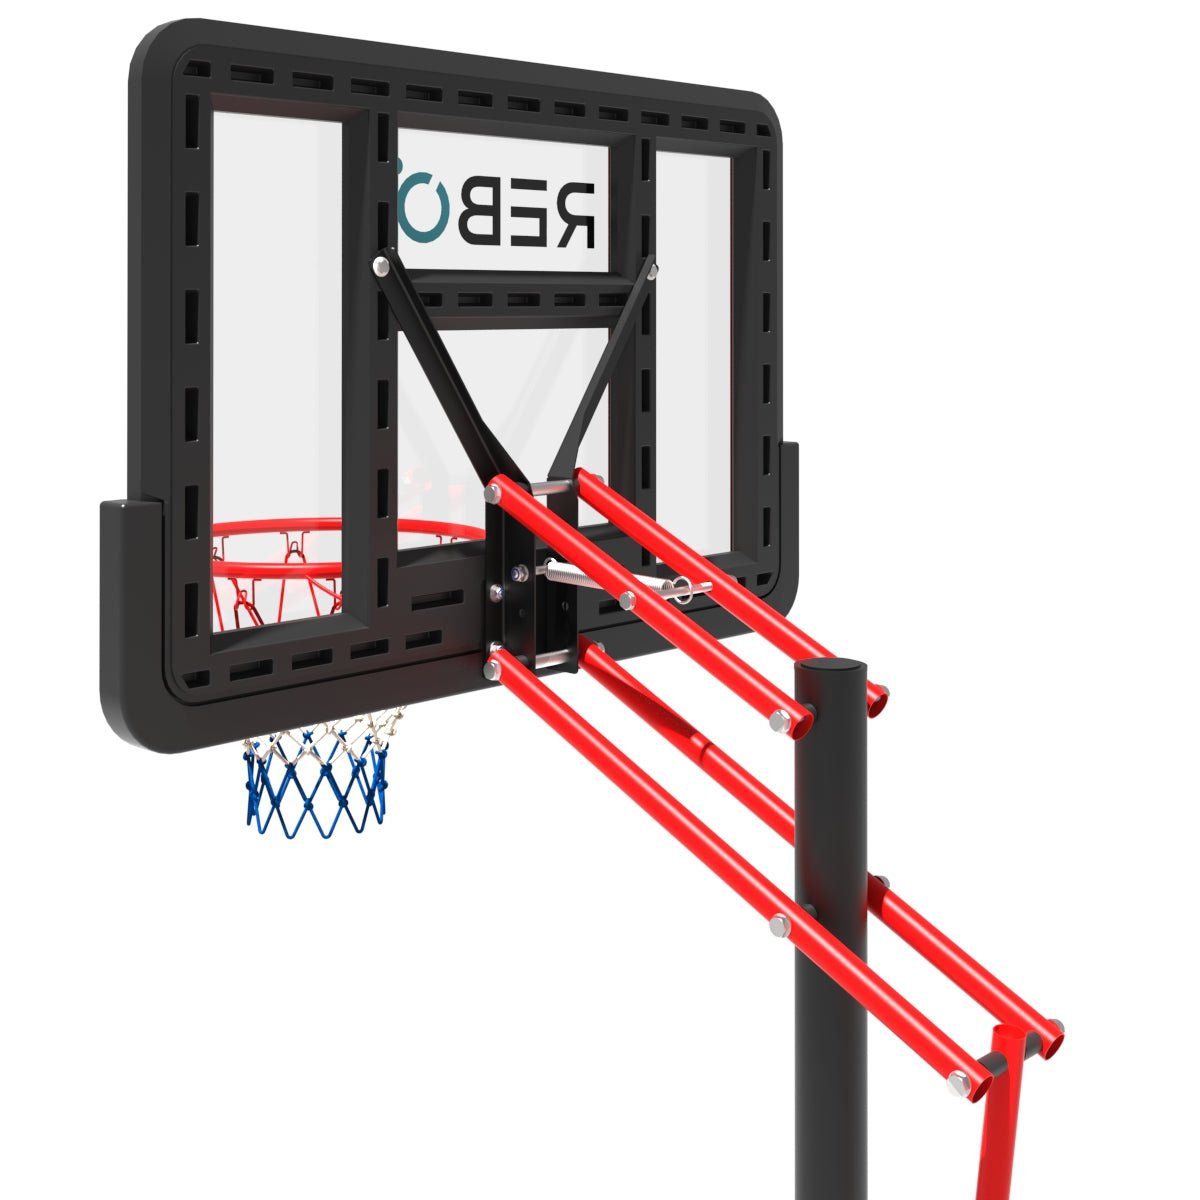 Rebo Freestanding Portable Basketball Hoop with Stand Adjustable Height - Large